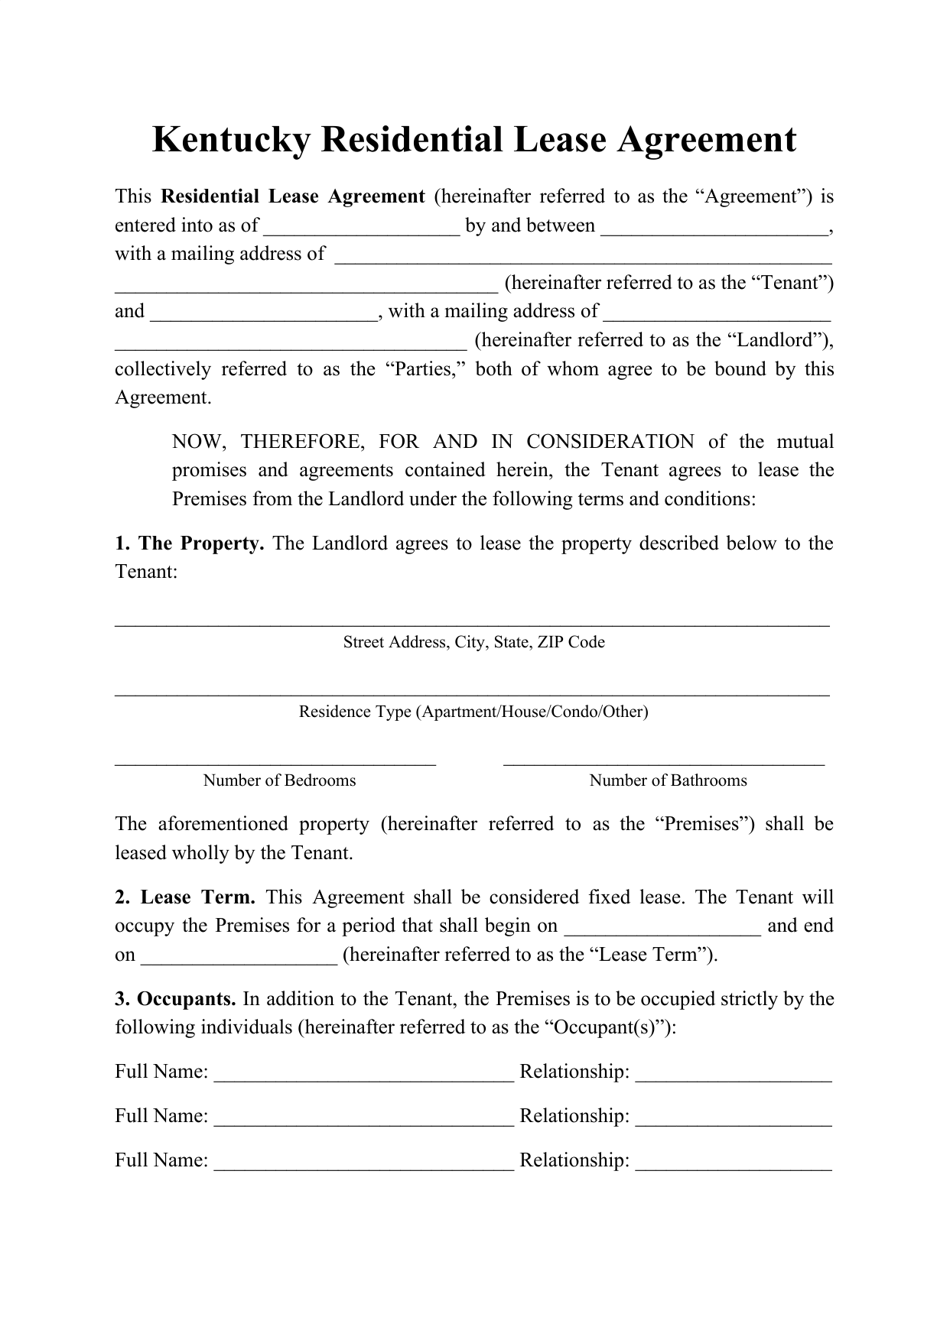 kentucky-residential-lease-agreement-template-download-printable-pdf